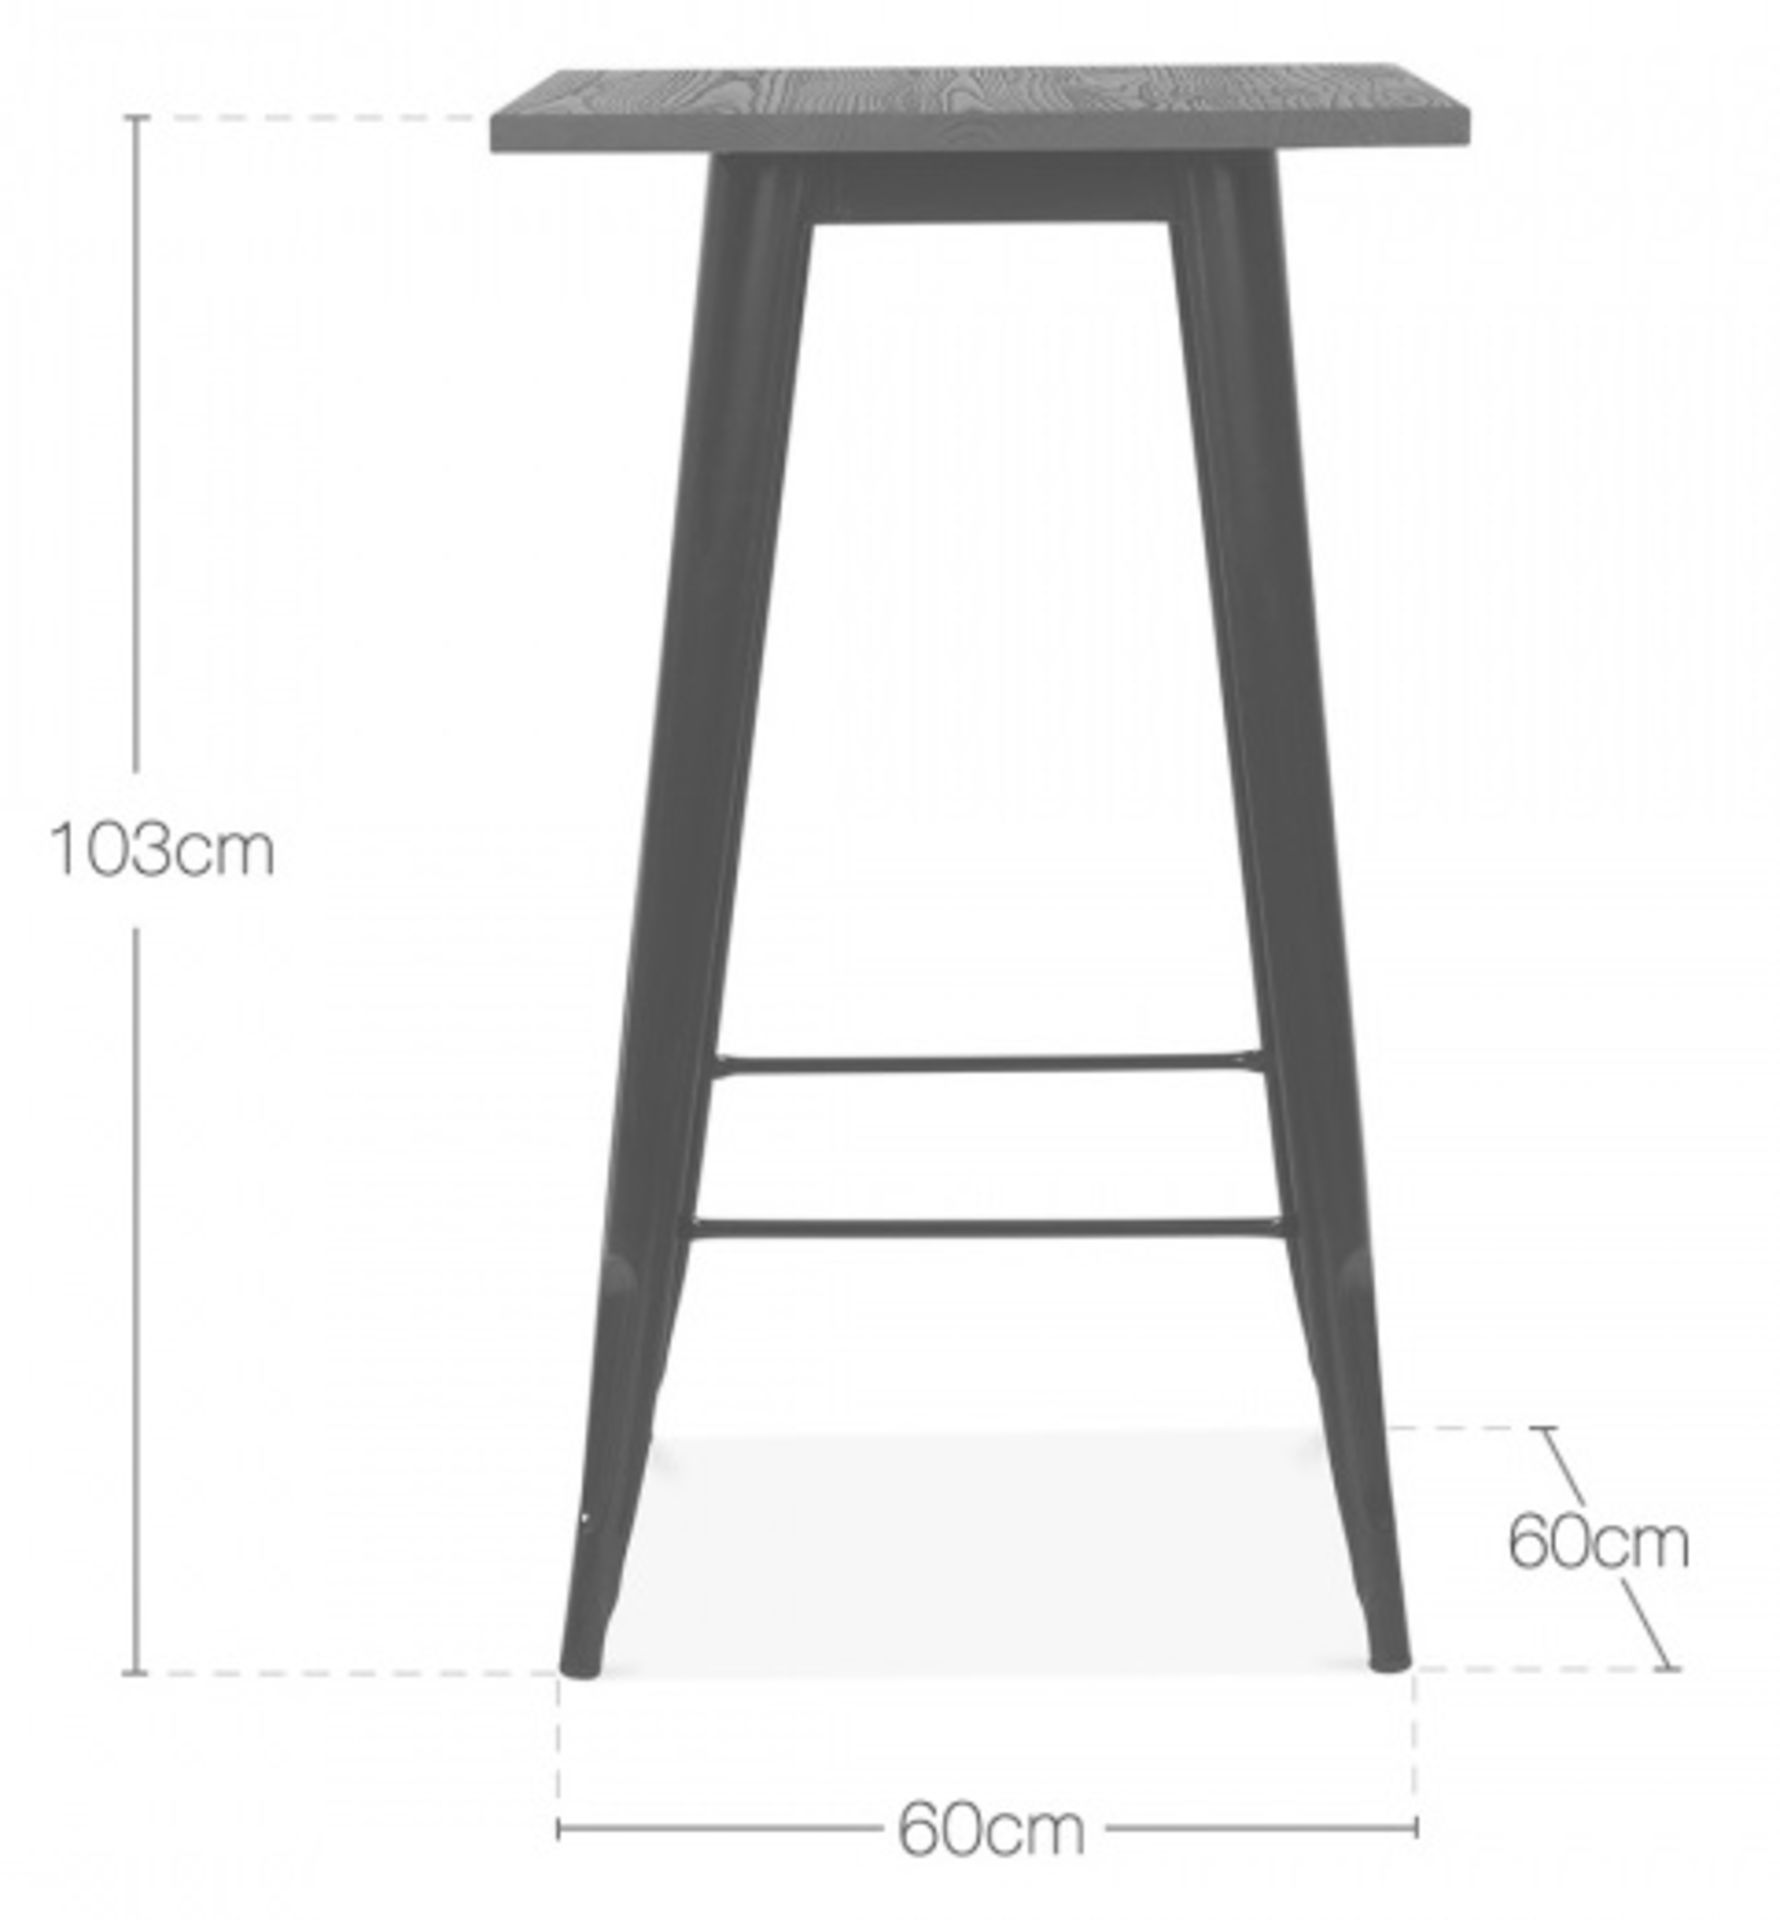 1 x Xavier Pauchard Inspired Industrial Metal Bar Table - Dimensions: 60x60xH103cm - Brand New - Image 5 of 5